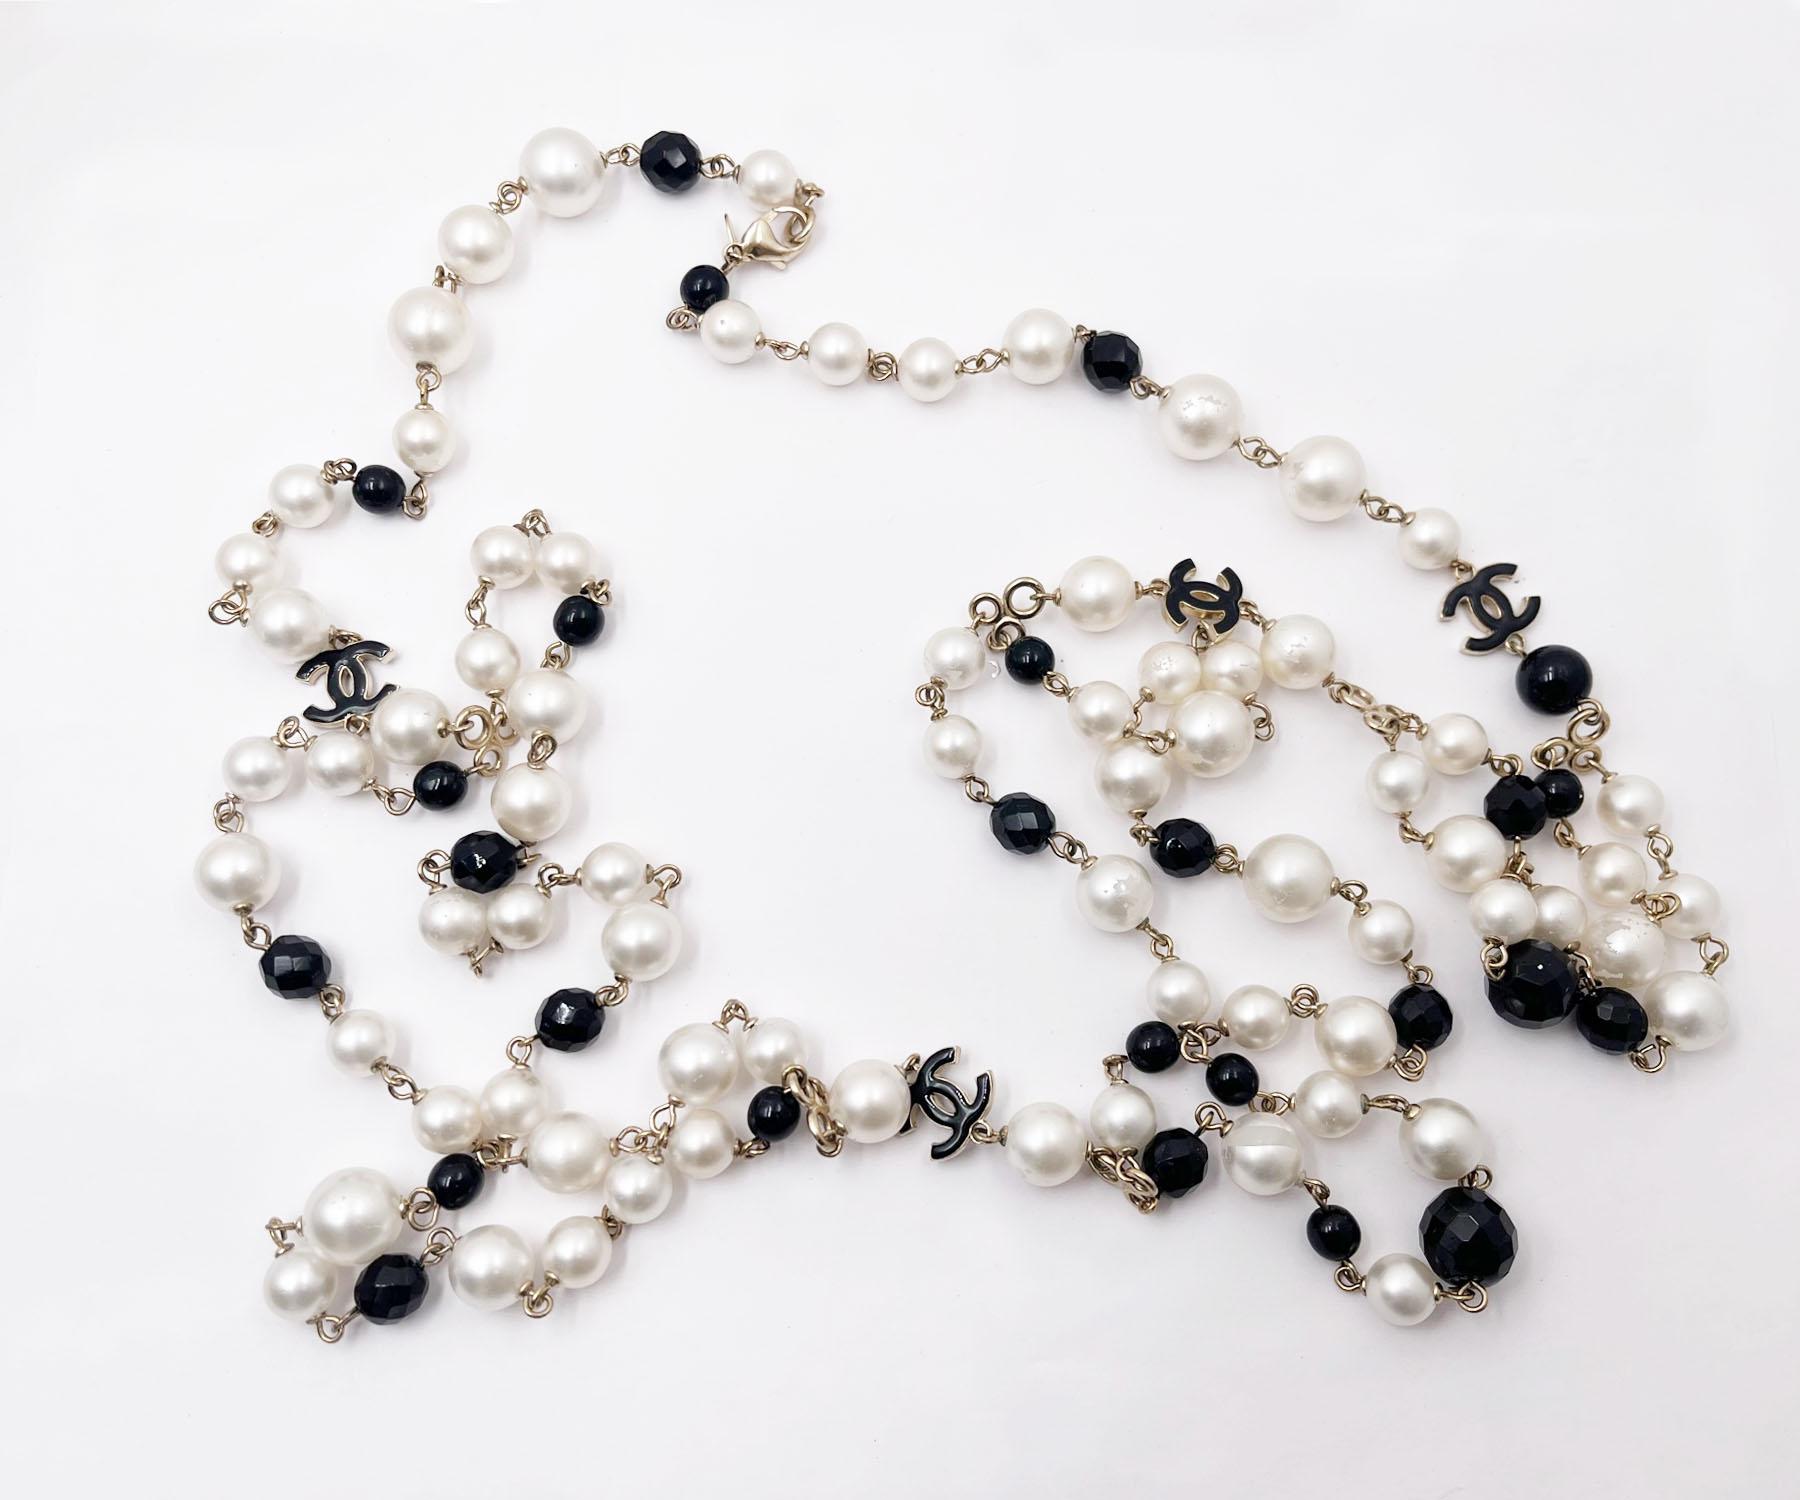 Chanel Black Enamel CC Black Bead Pearl Necklace

*Marked 06
*Made in France

-It is approximately 50